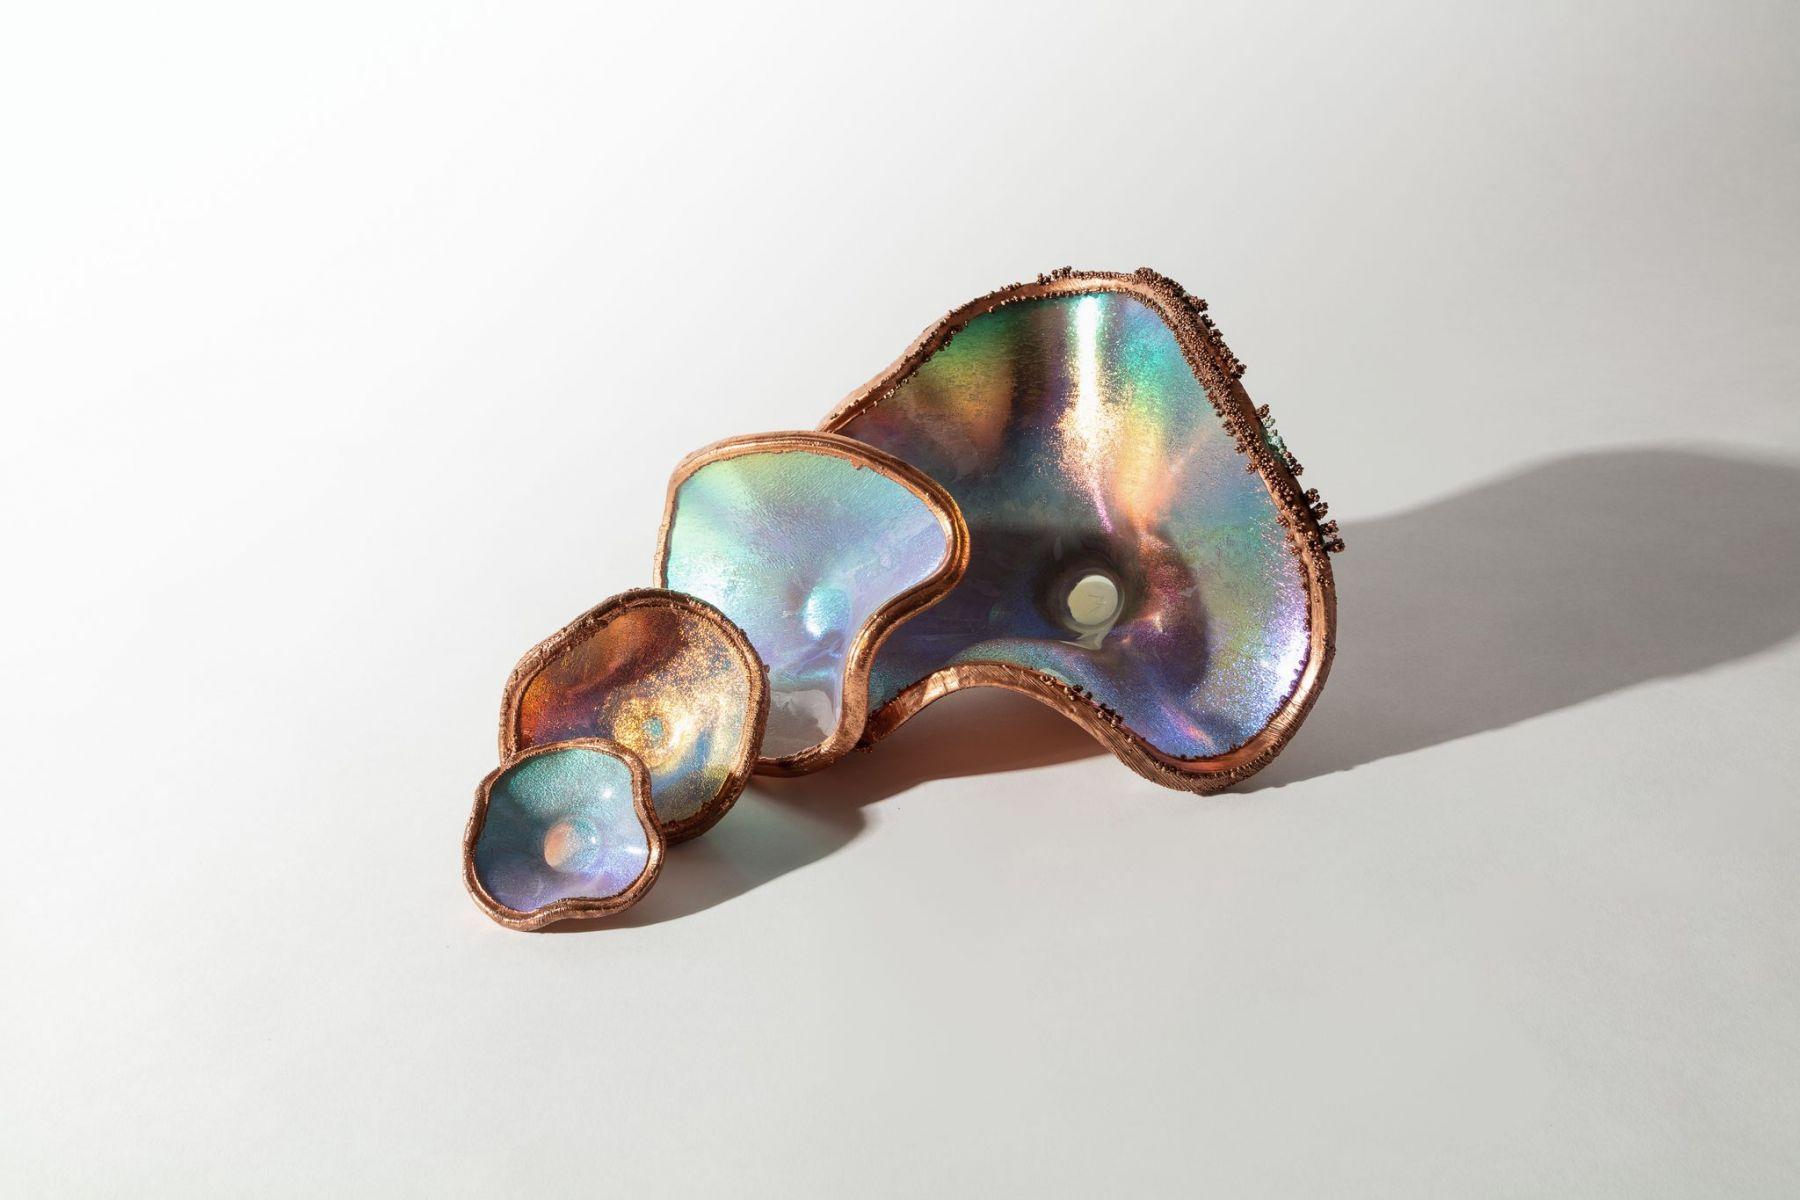 Christopher Windsor
Dichro Nesting Bowl Set, 2012
Borosilicate glass and copper
Dimensions vary